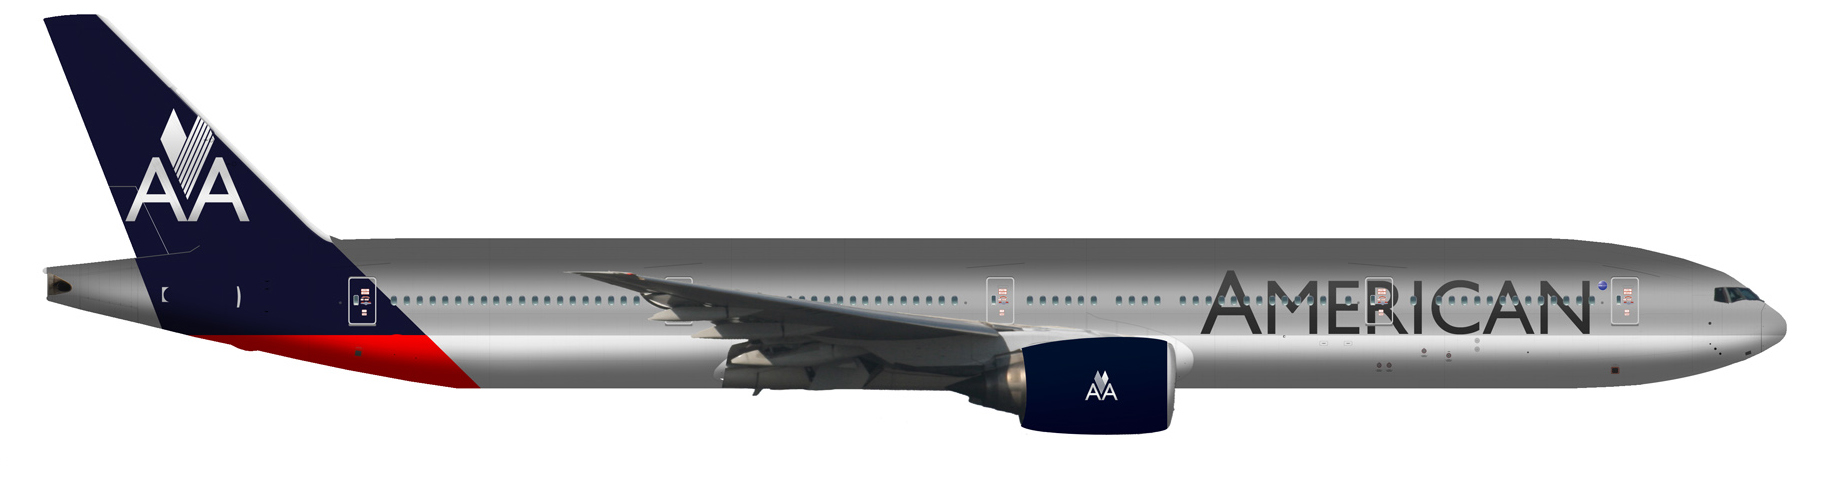 Download UPDATED: American Airlines Set to Get a New Livery Soon ...